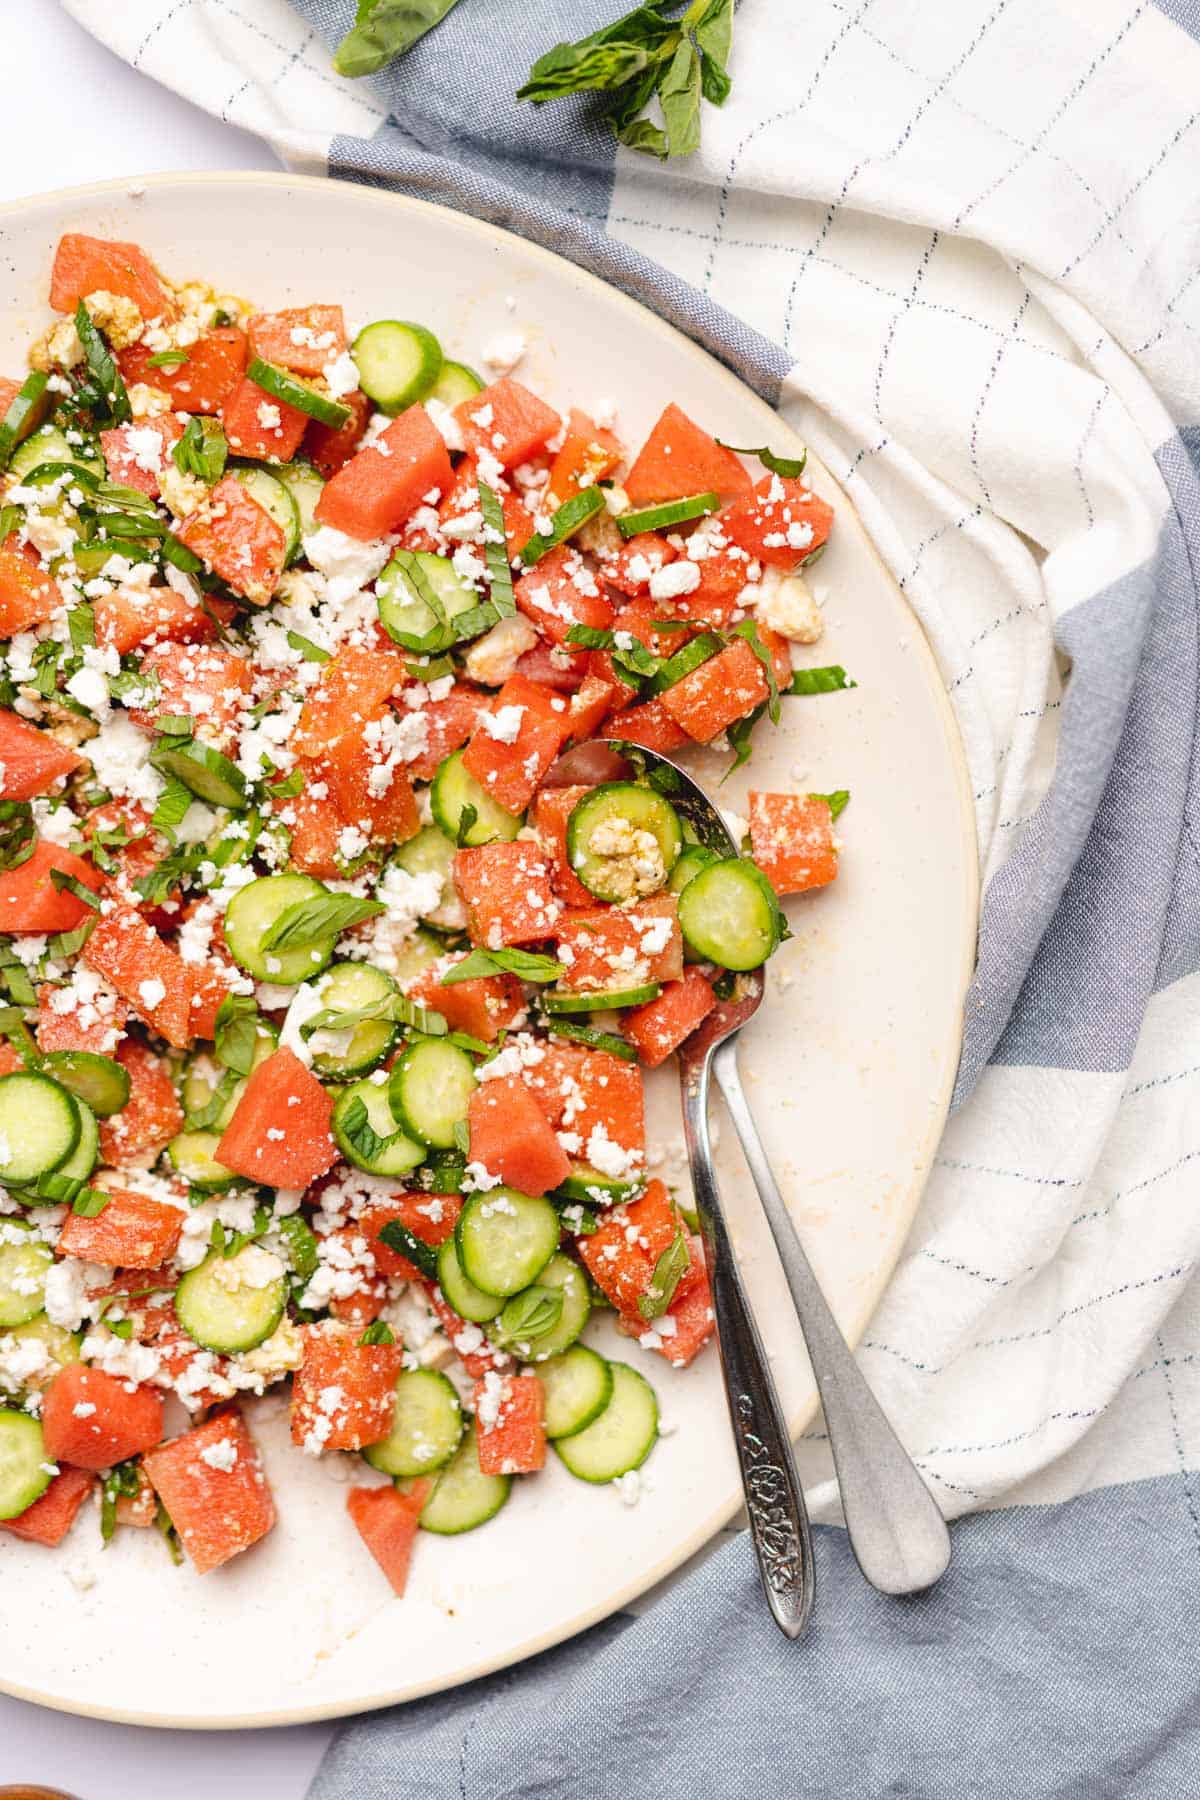 spoon tucked into the side of a watermelon feta salad with herbs and cucumber